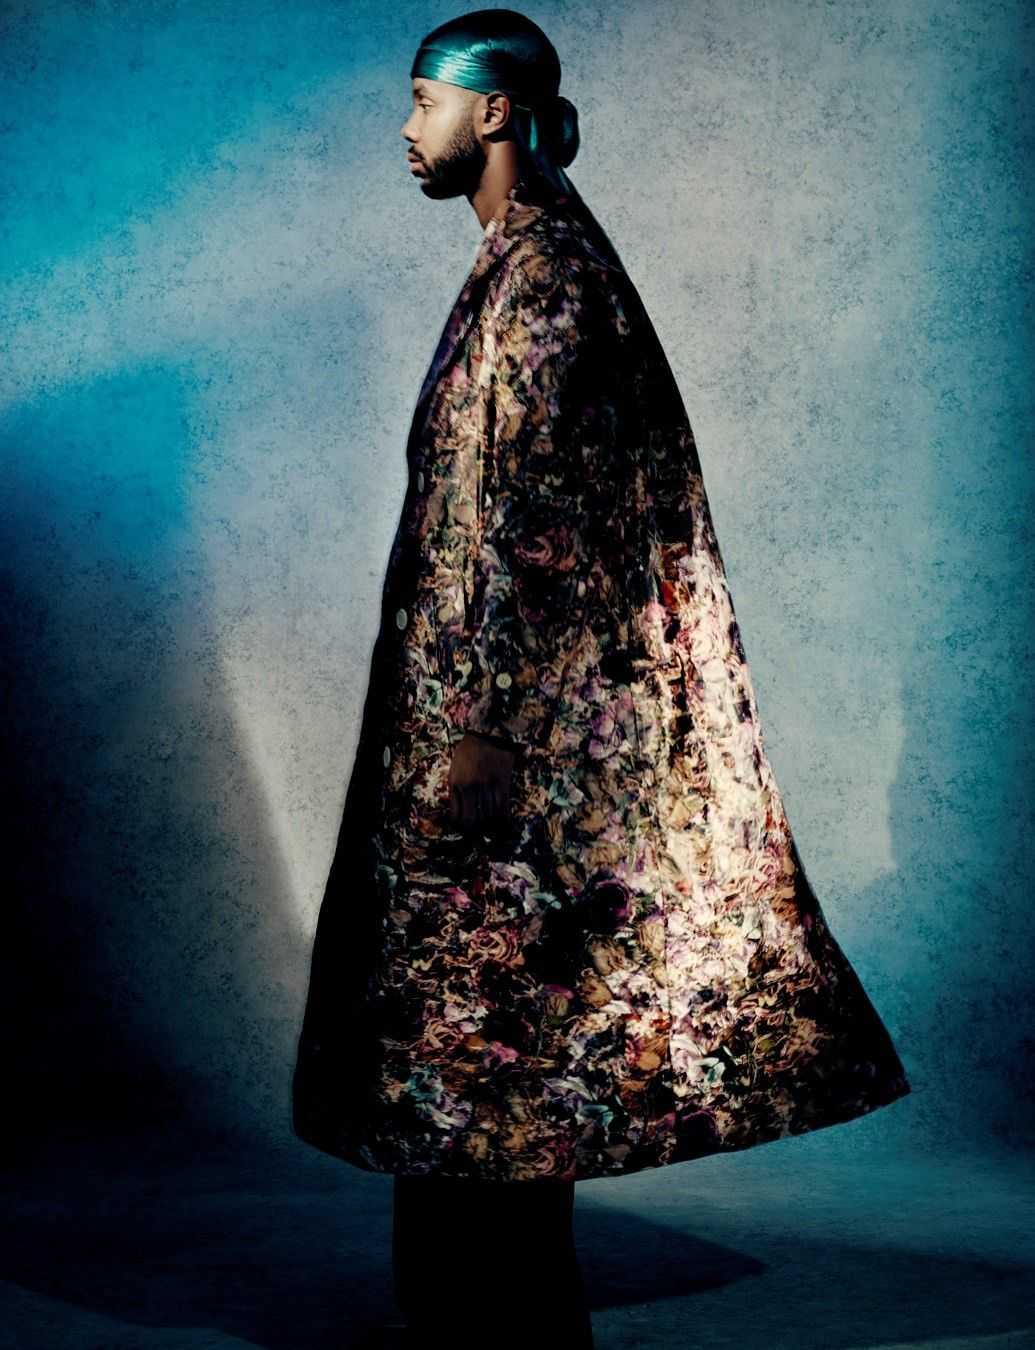 DAZED 'Old Soul, New Spirit' - Paolo Roversi - 2918